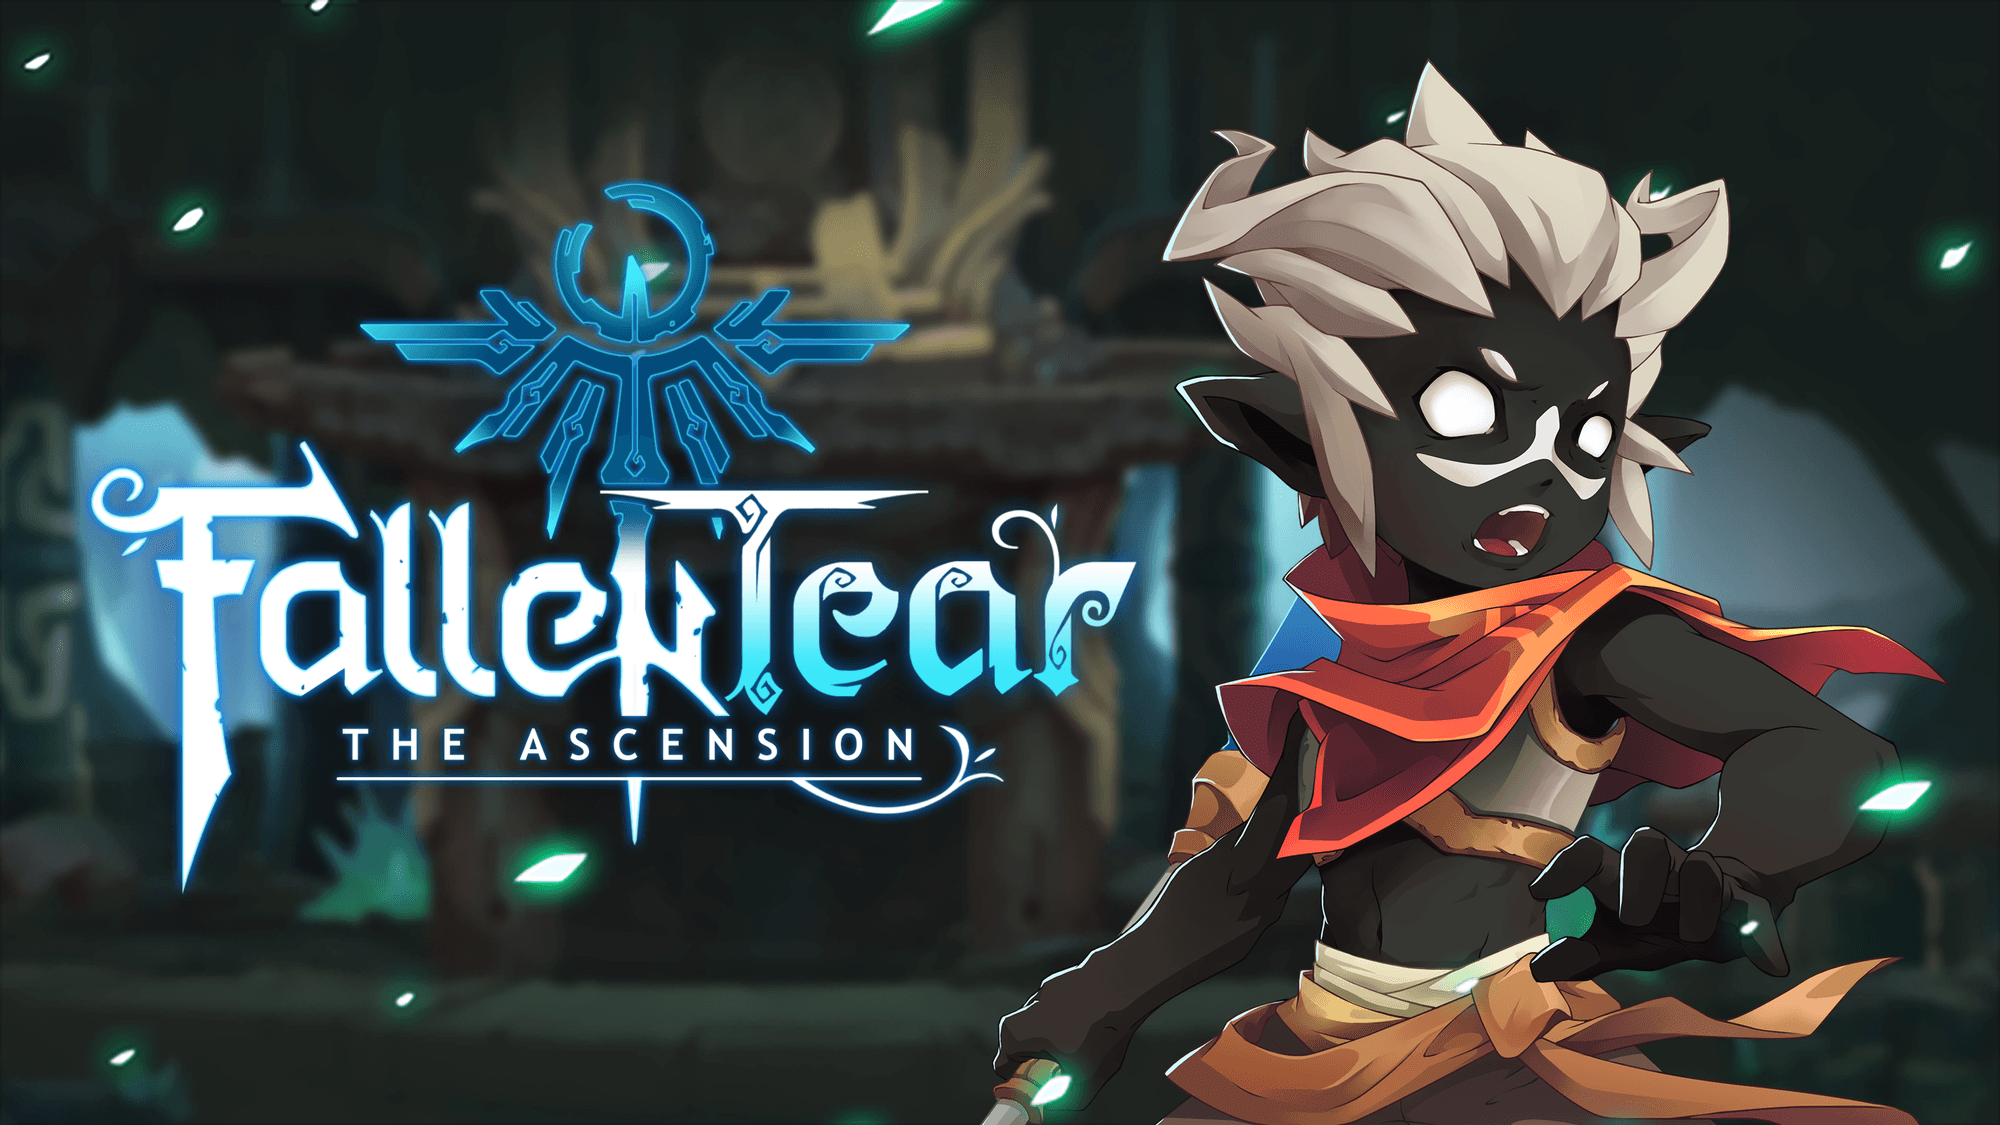 Filipino-made game ‘Fallen Tear: The Ascension’ dazzles with beautiful hand-drawn animation